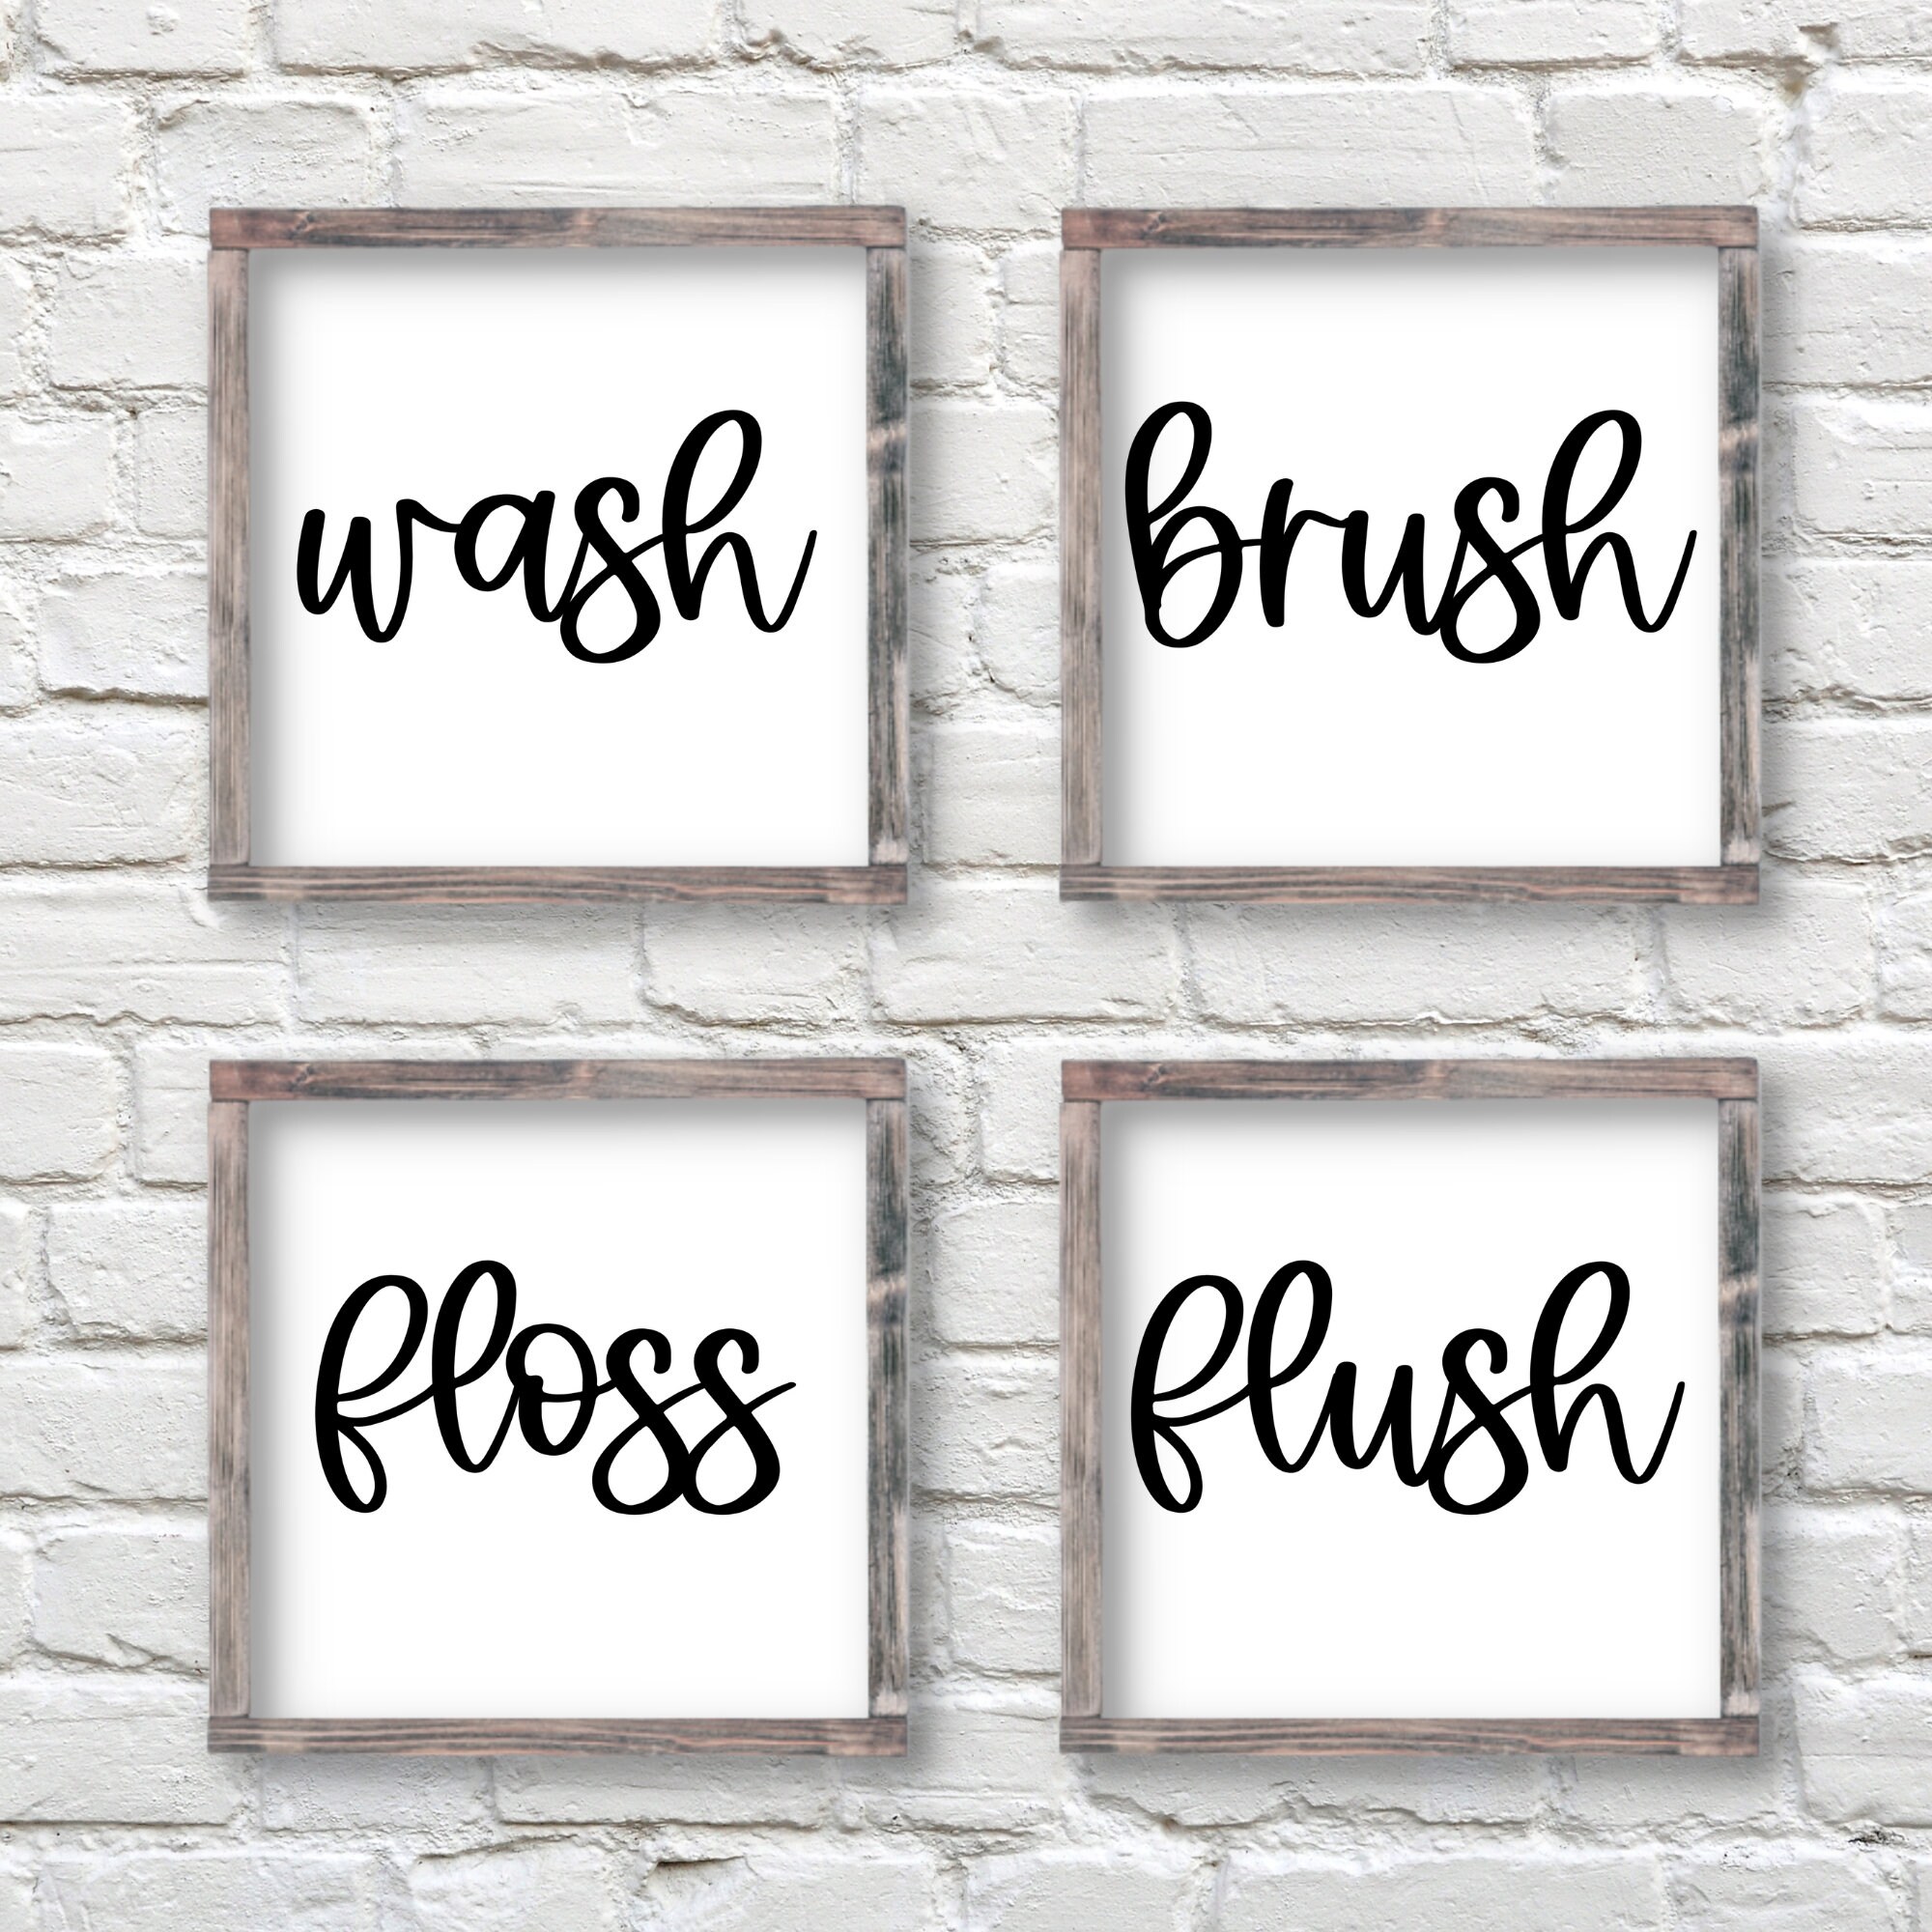 Athena's Elements Farmhouse Bathroom Wall Decor Wash, Brush, Floss, Flush  Sign Modern Rustic Style Home Decoration Solid Wood Frame 32 x 7 inches or